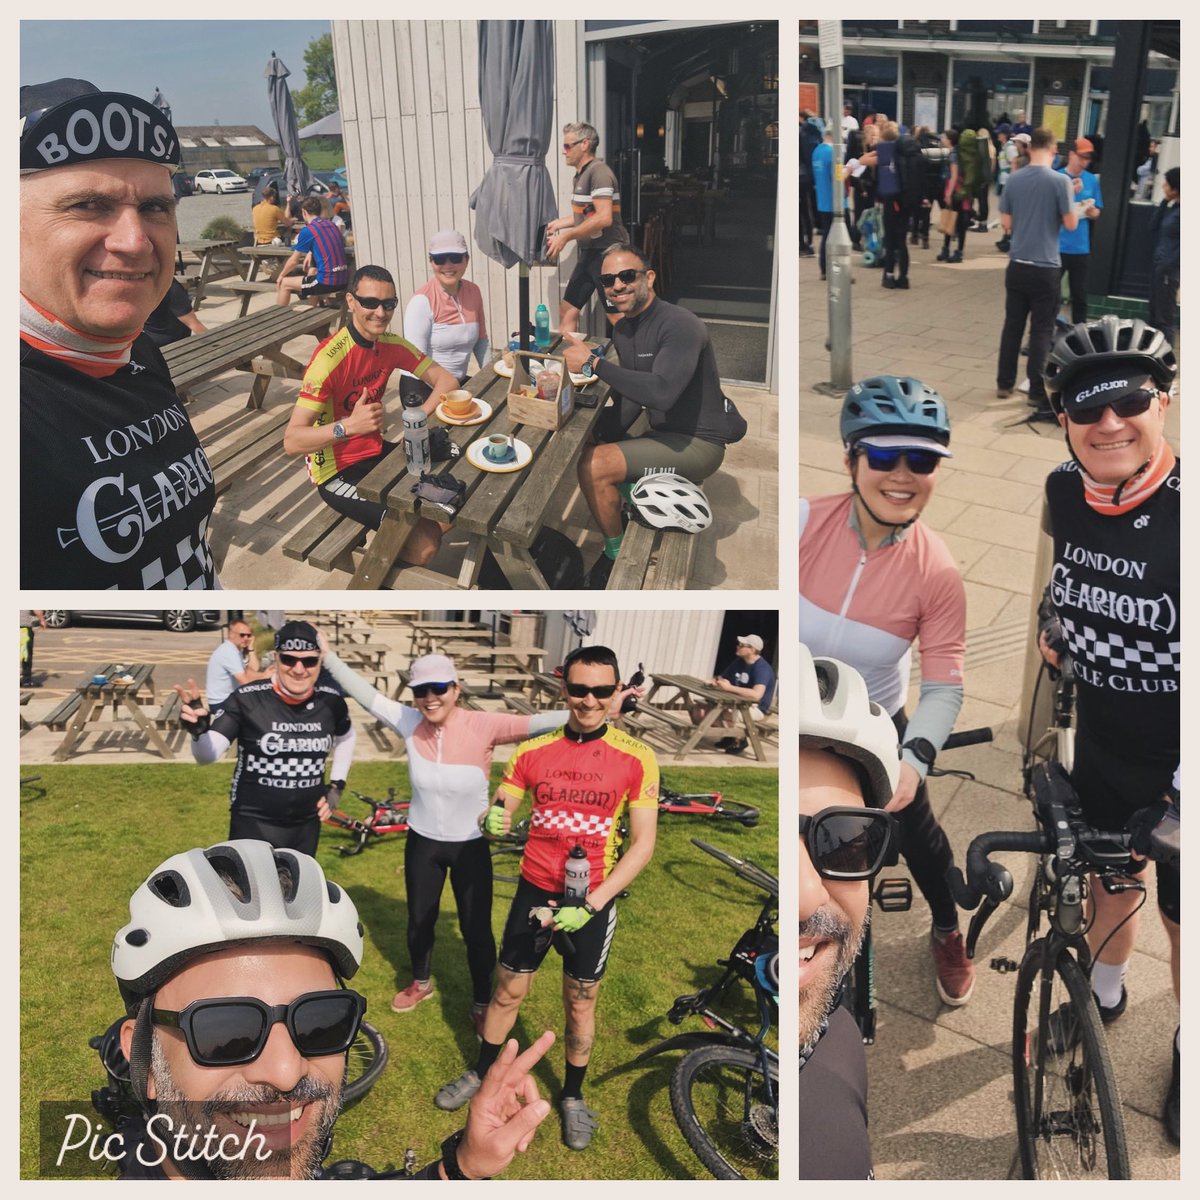 Impromptu club ride today to make the most of the glorious weather in #london today. Clapham Junction to Shoreham, Kent via Down House (Charles Darwin’s house). #cycling #cyclingclub #clarioncycling